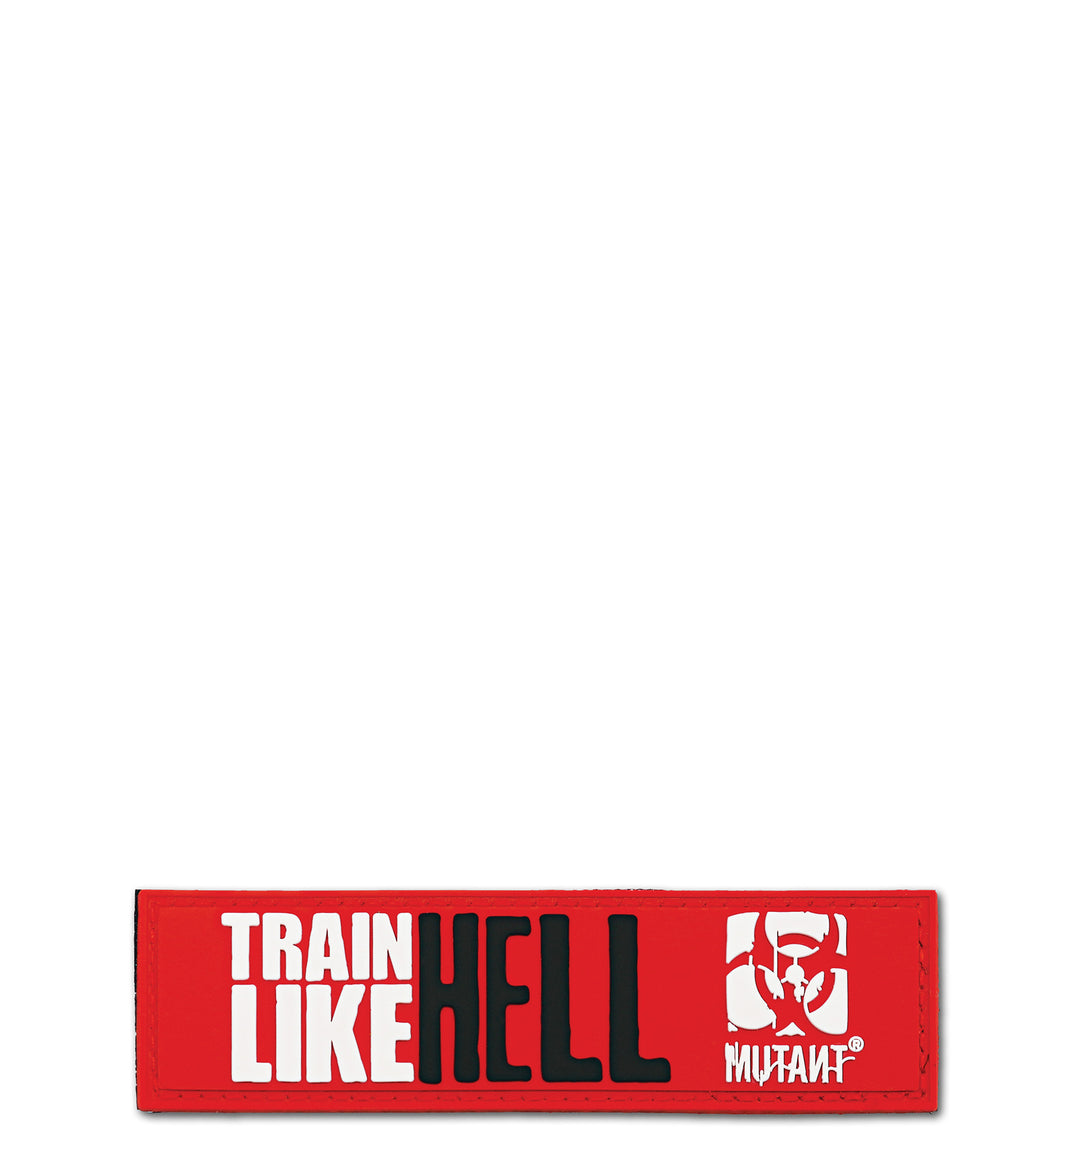 TRAIN LIKE HELL Velcro Patch Black/Red 11x3cm